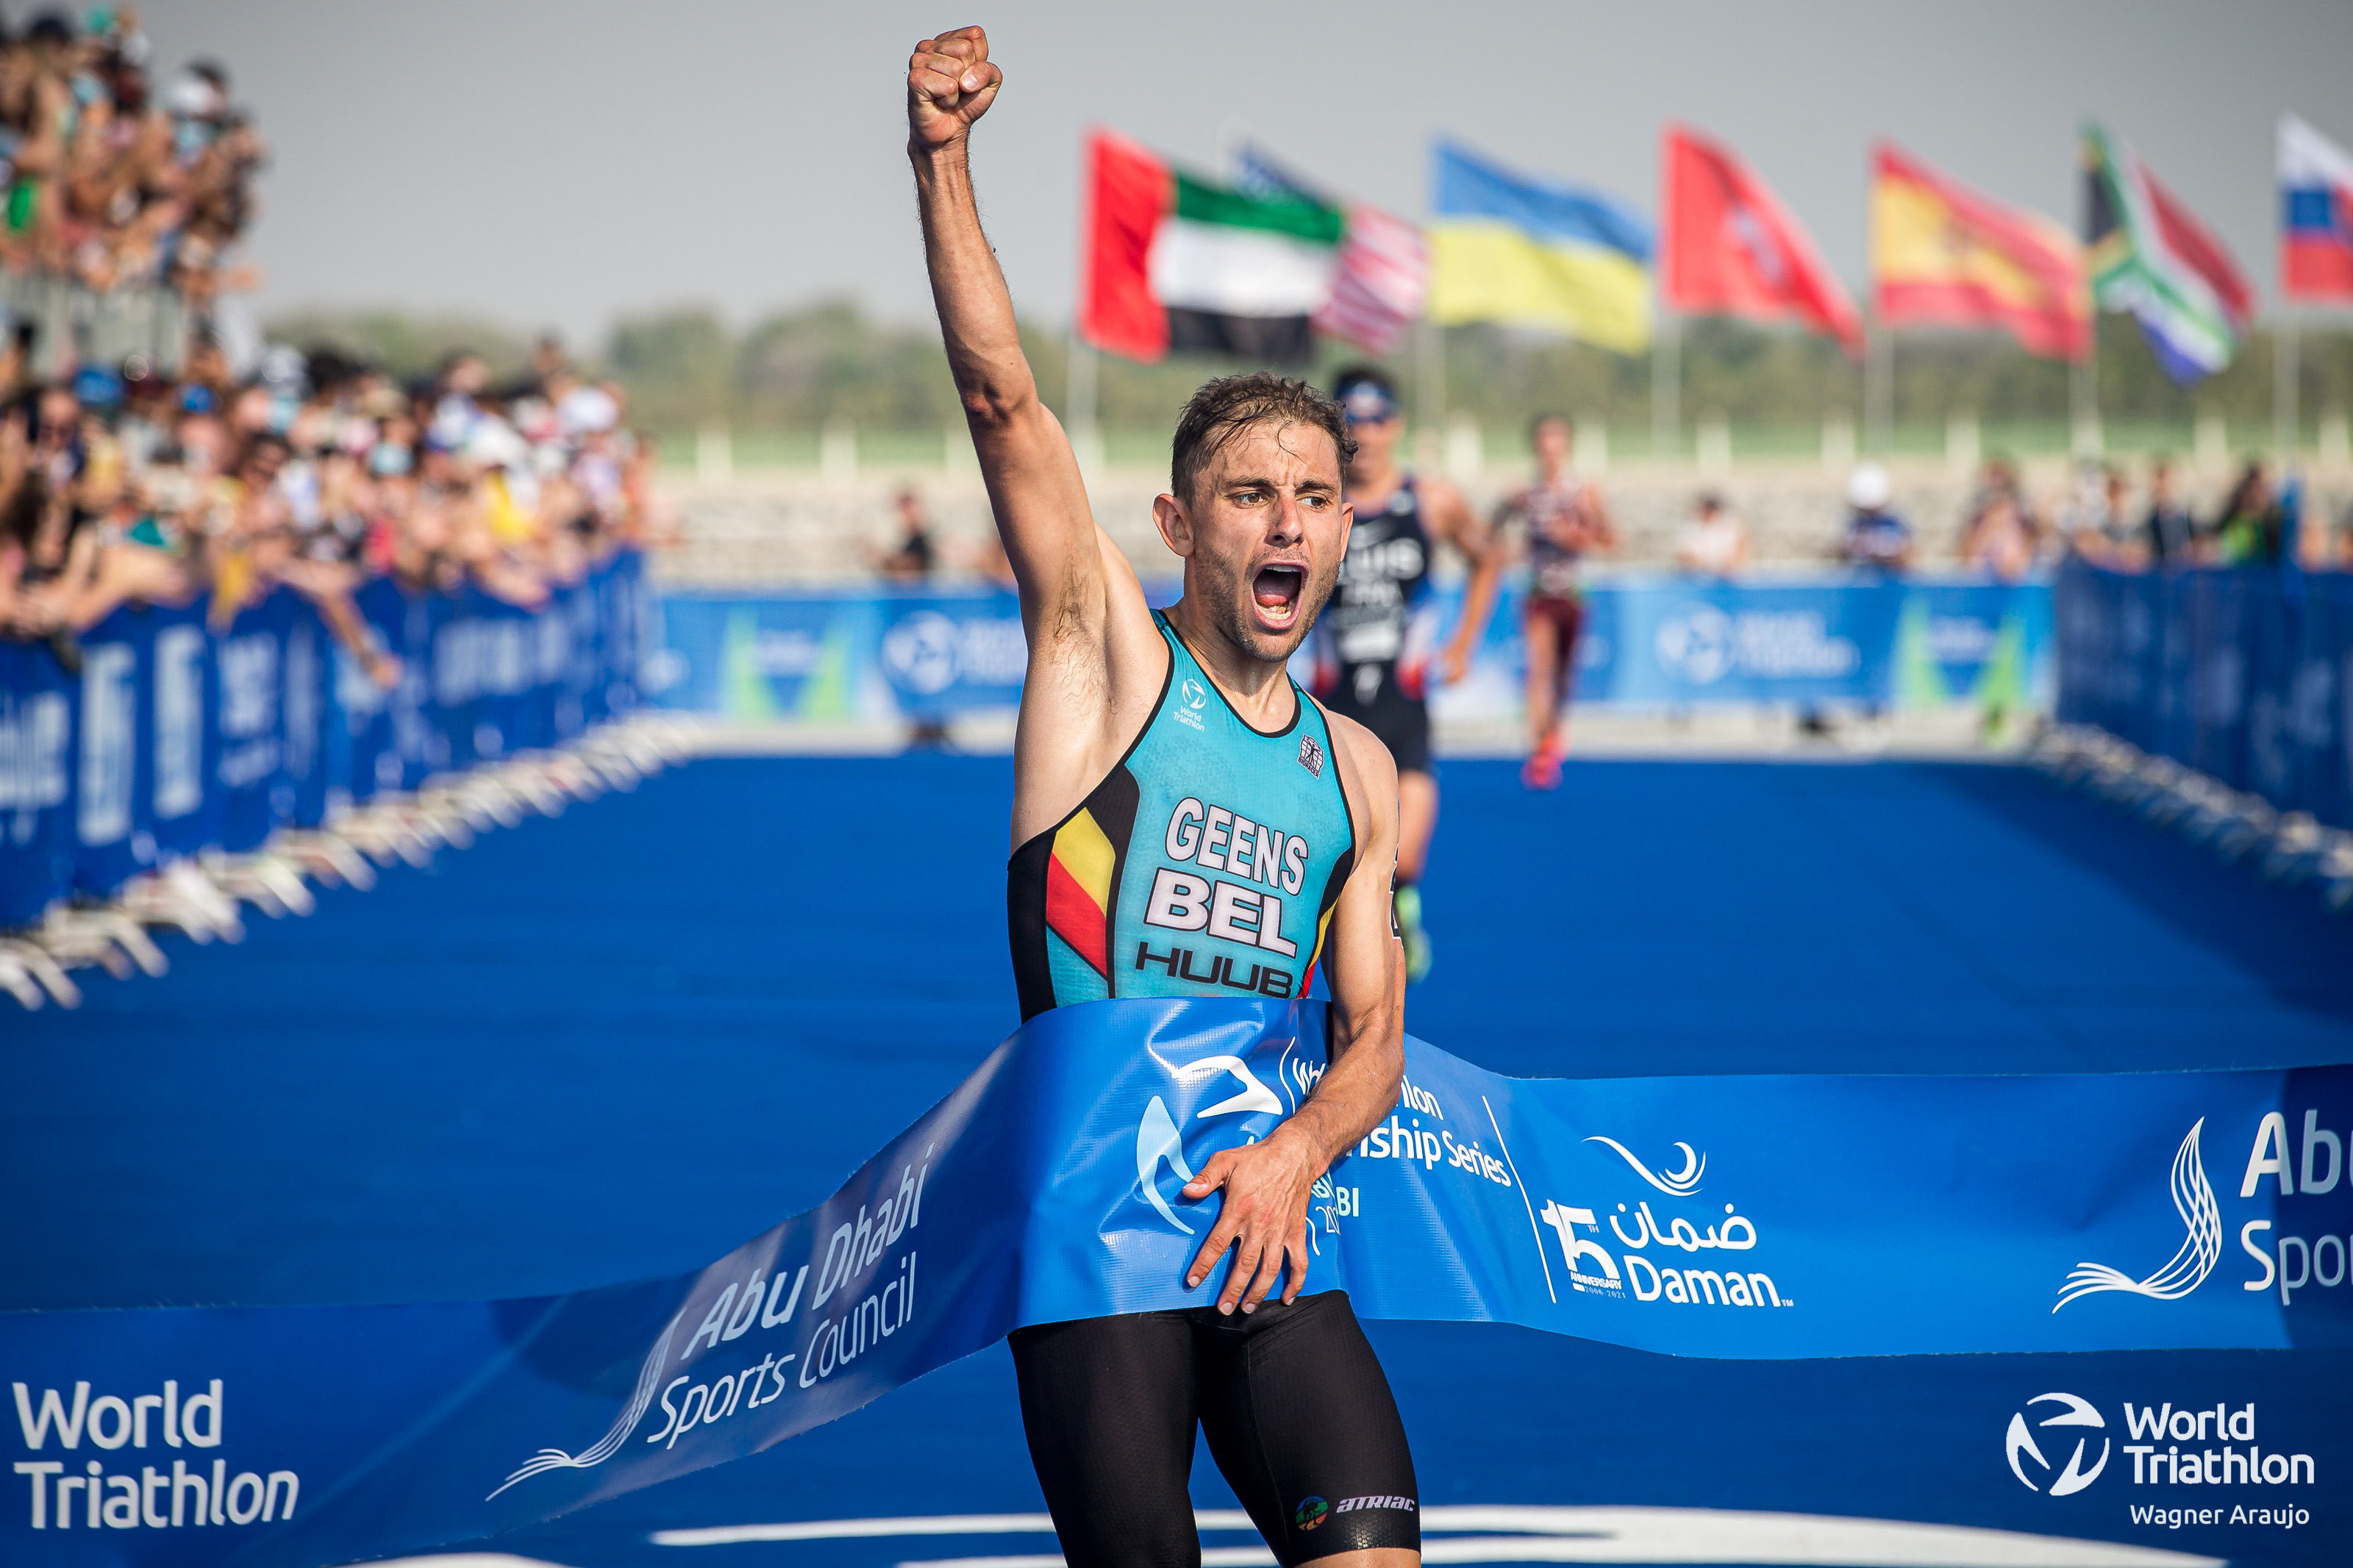 Jelle Geens back to his best with rampant run to WTCS gold in Abu Dhabi —  World Triathlon